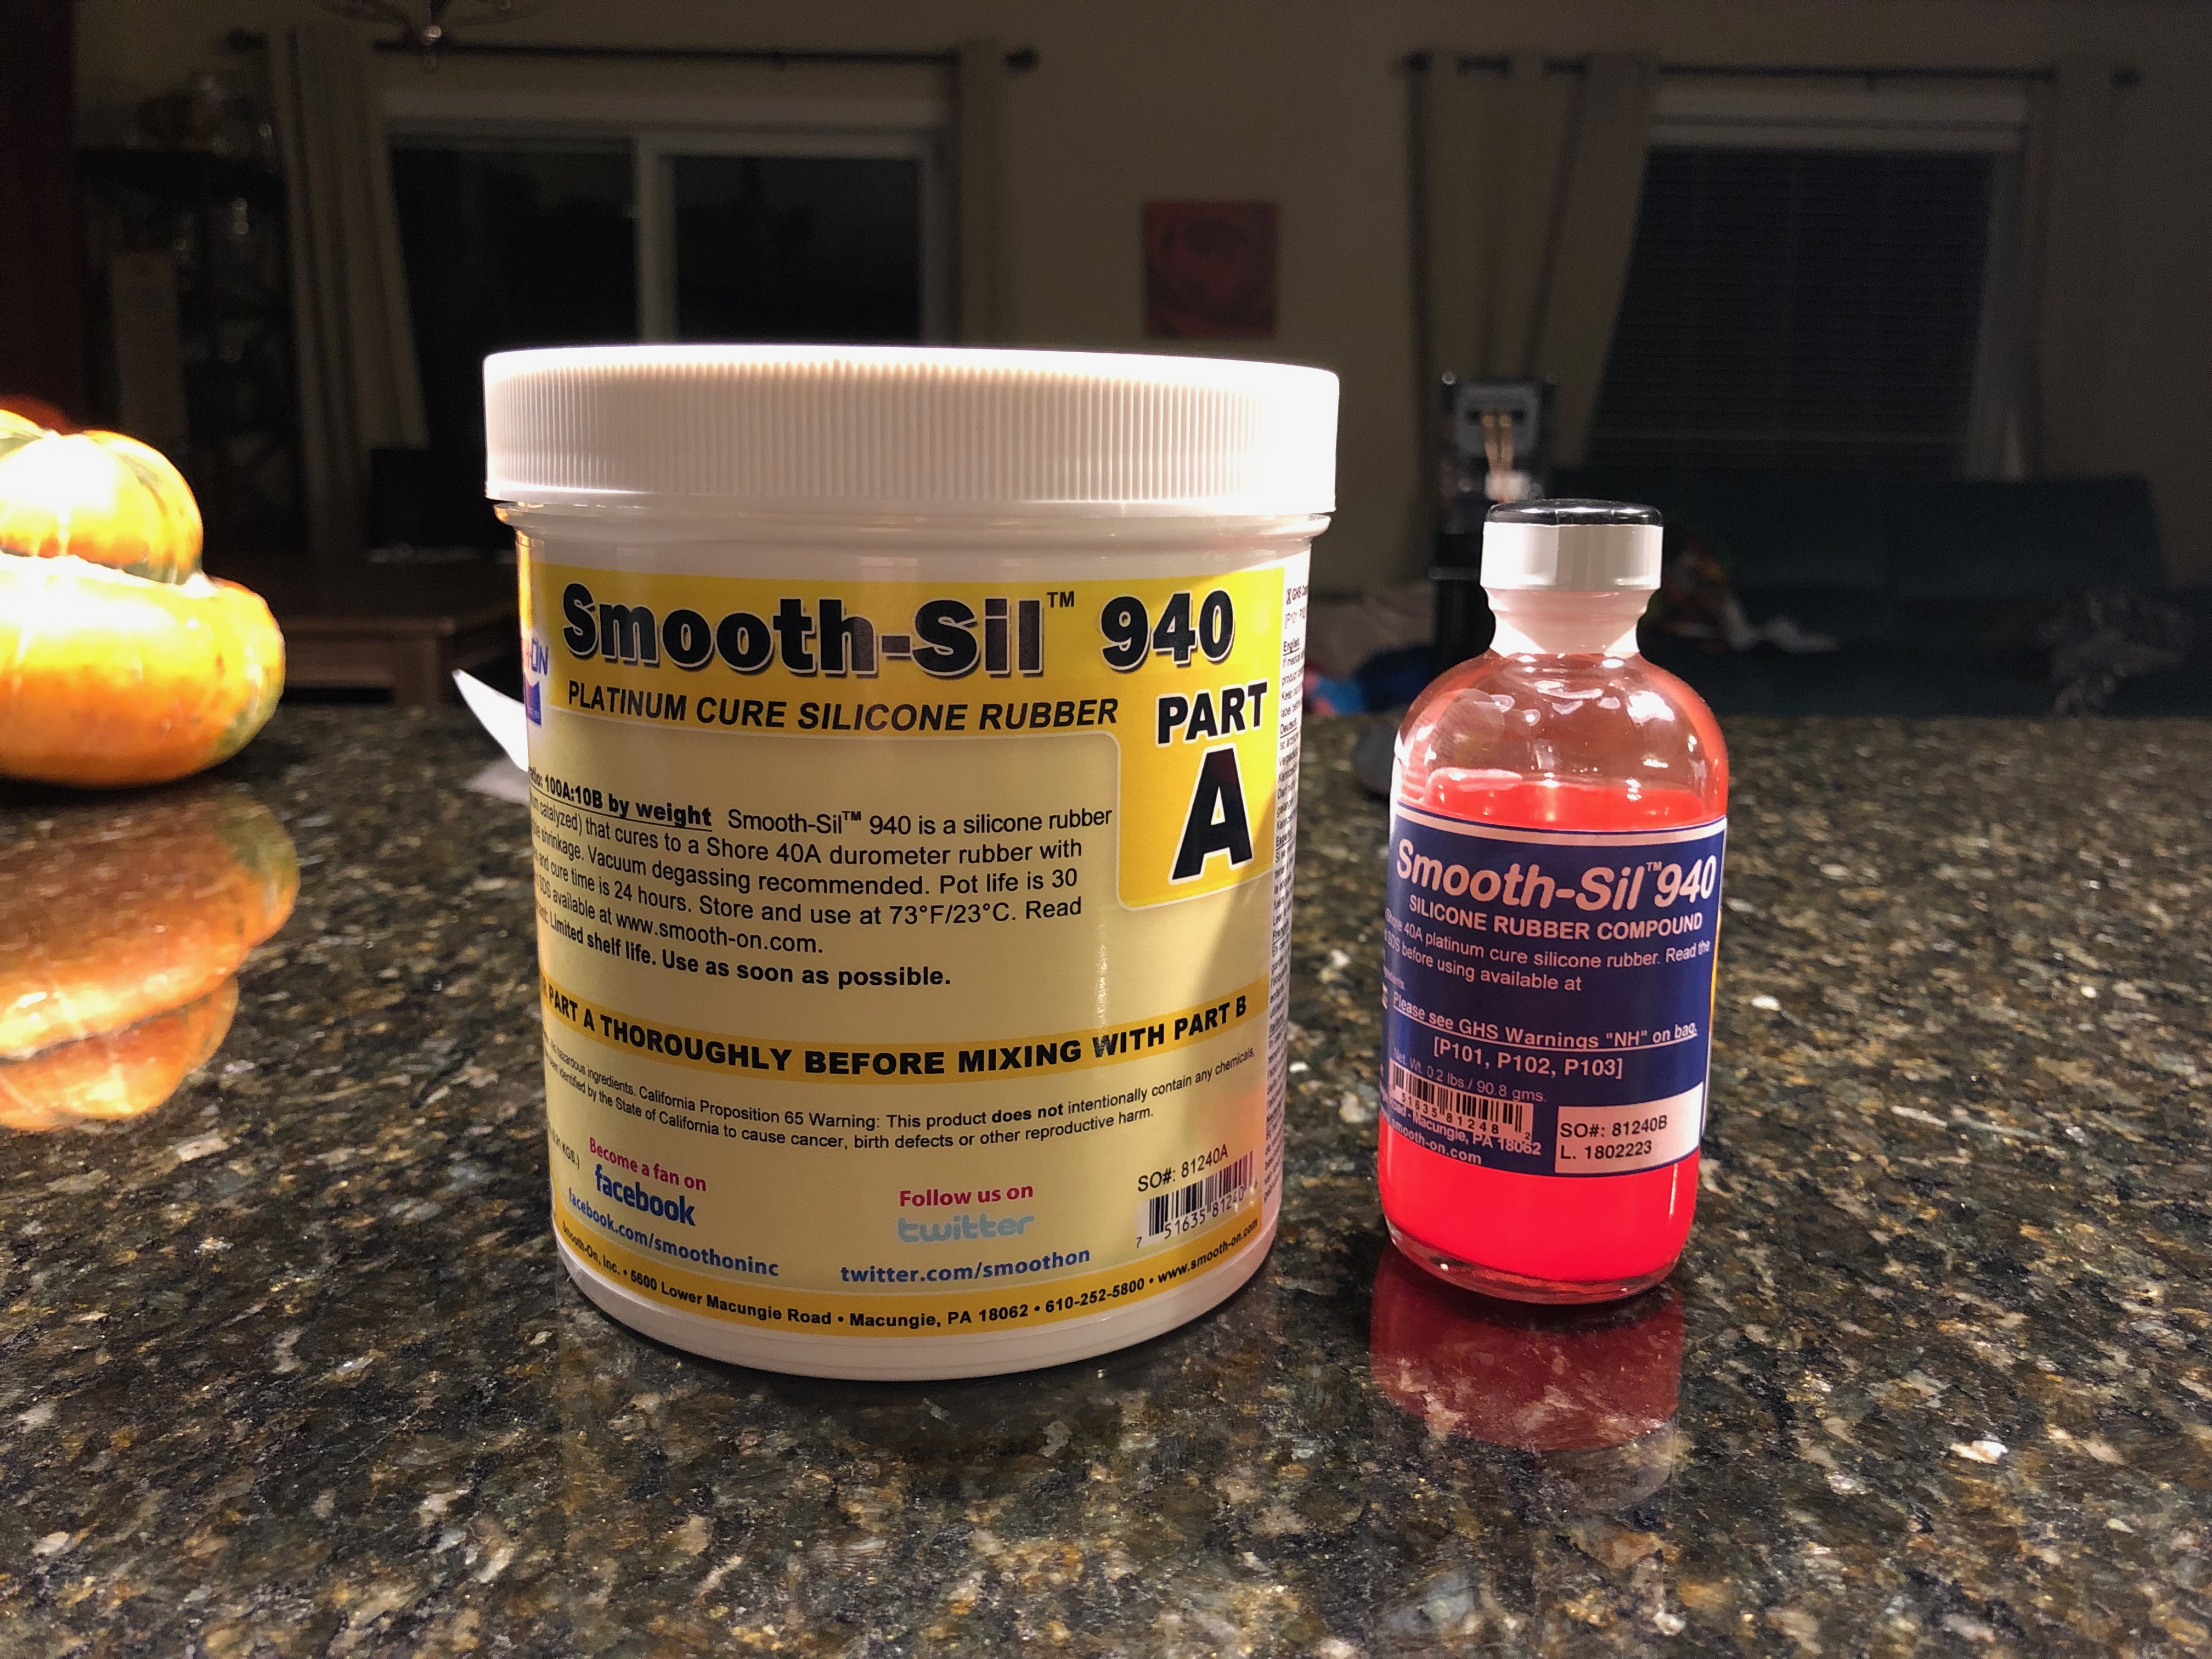 Smooth-Sil 940 Platinum Cure Silicone Rubber Compound